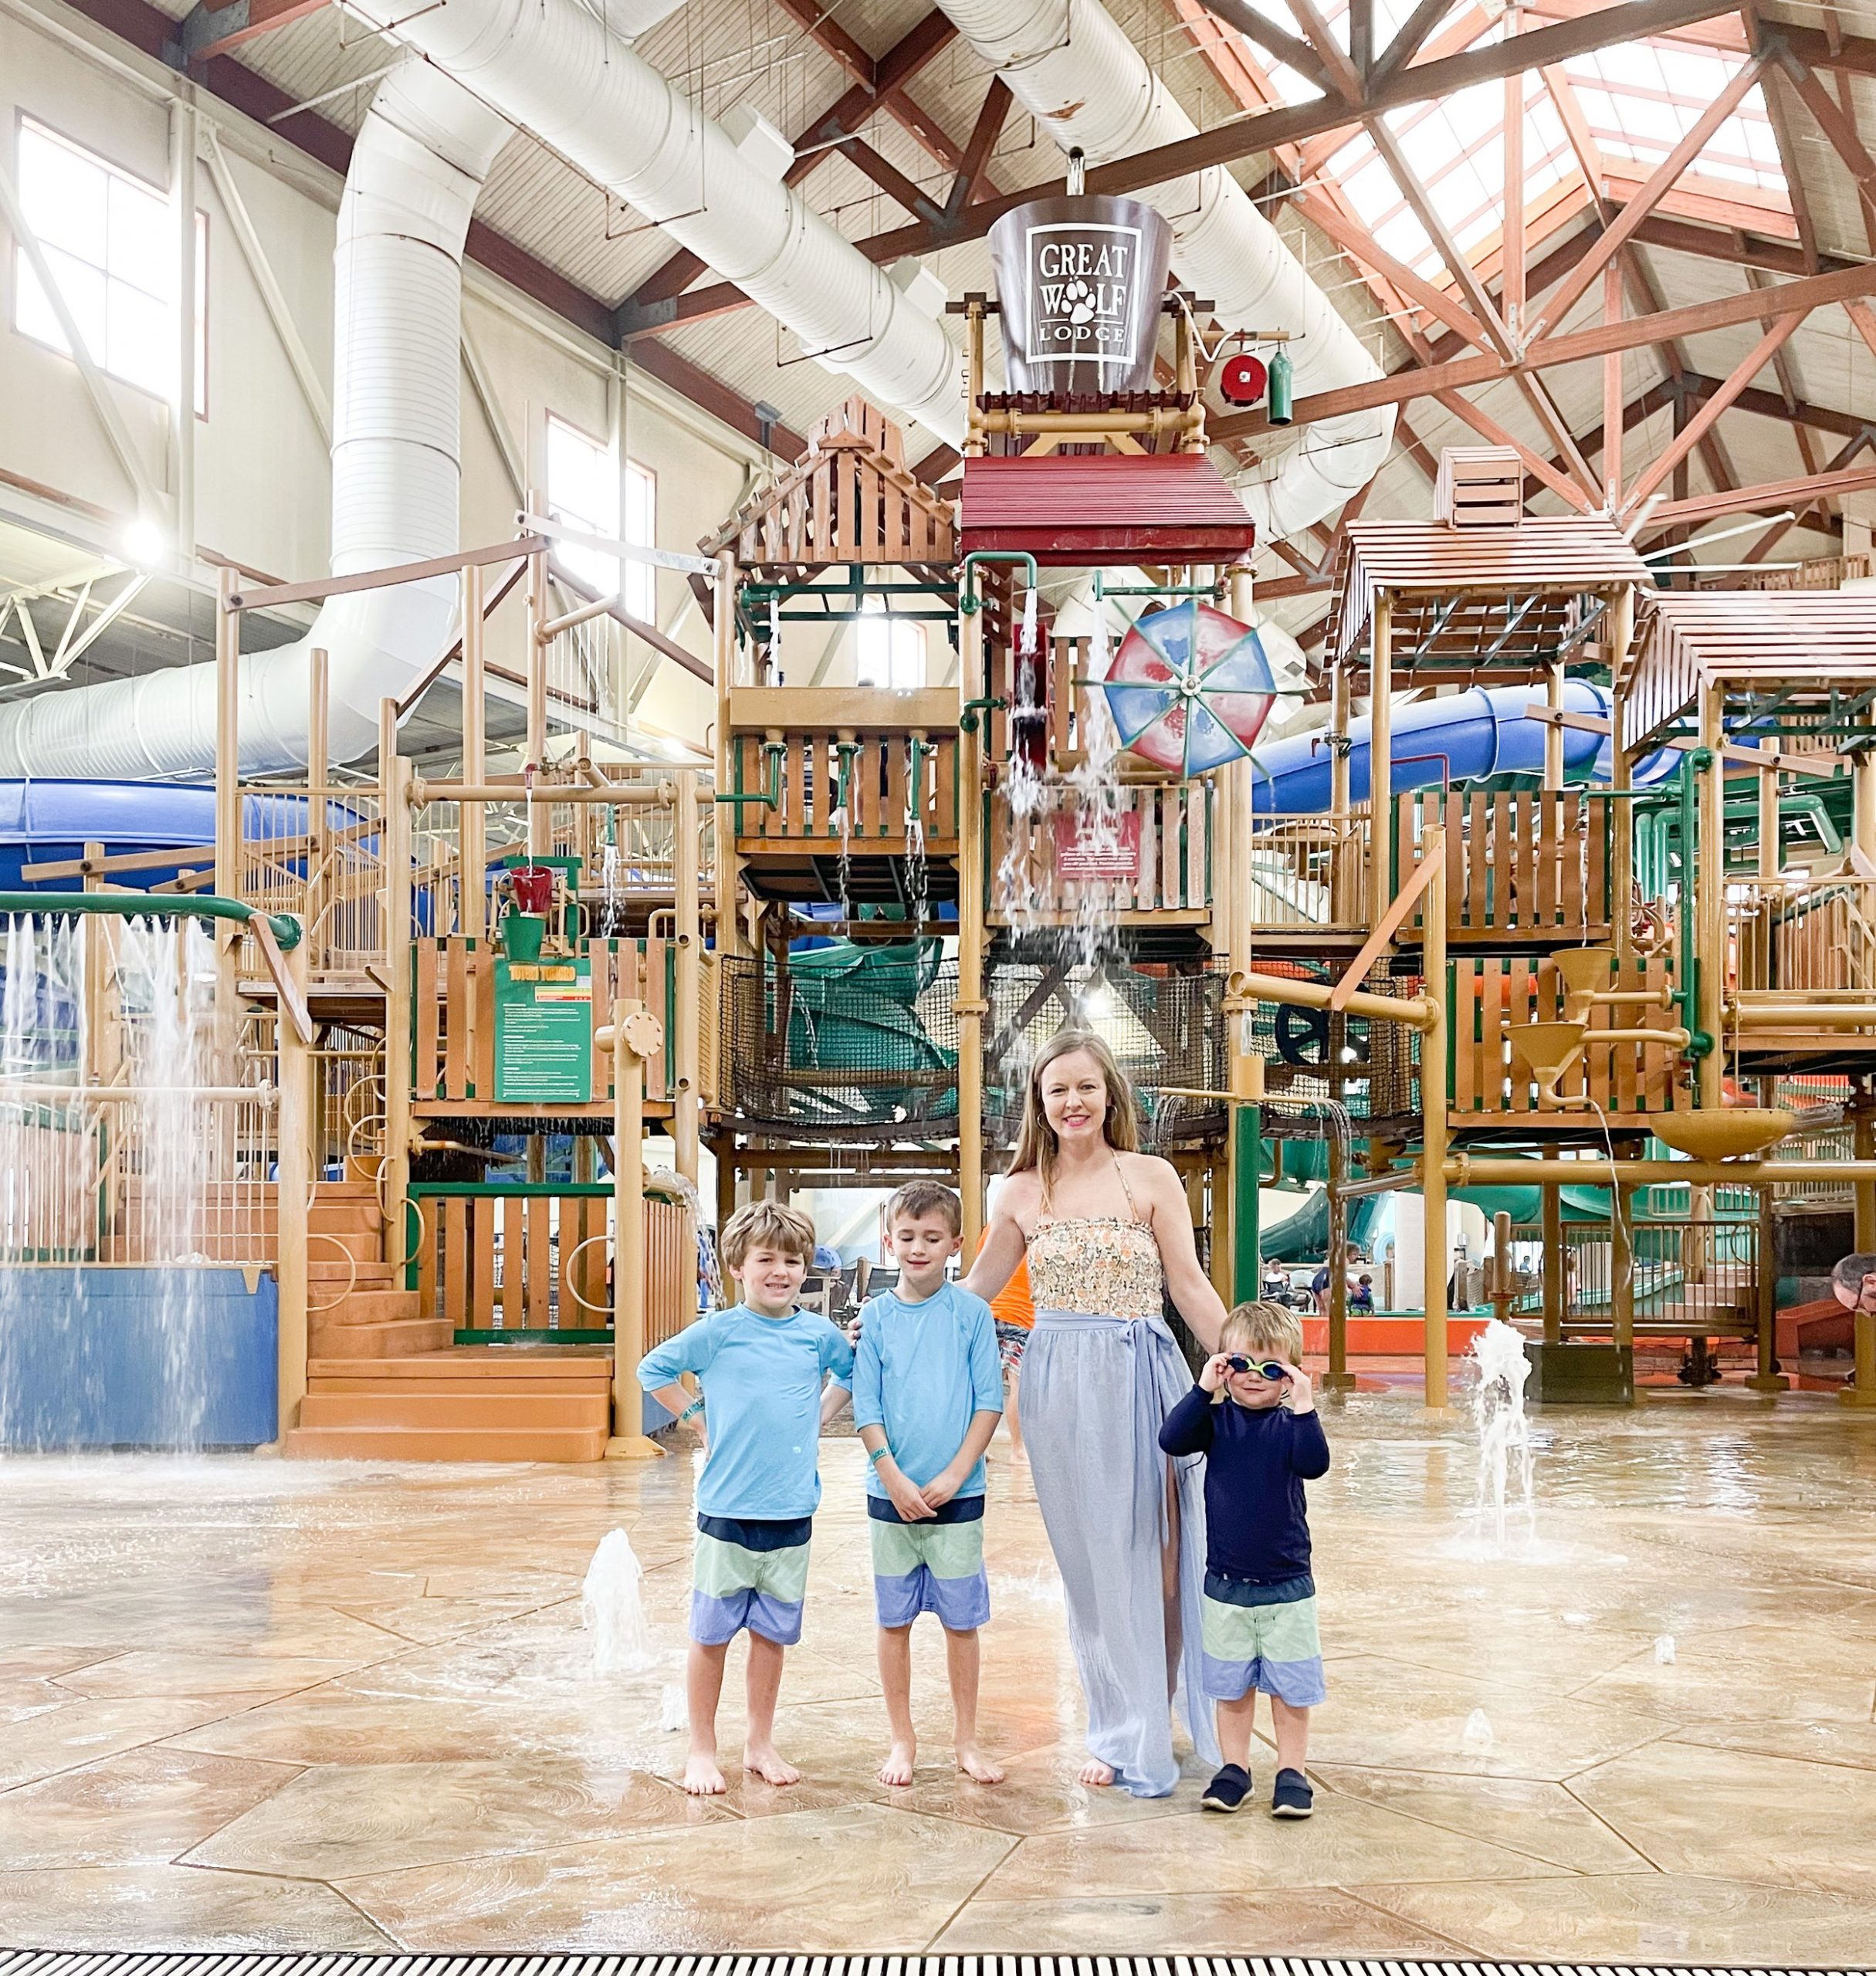 North America's Largest Family Indoor Water Park Resorts